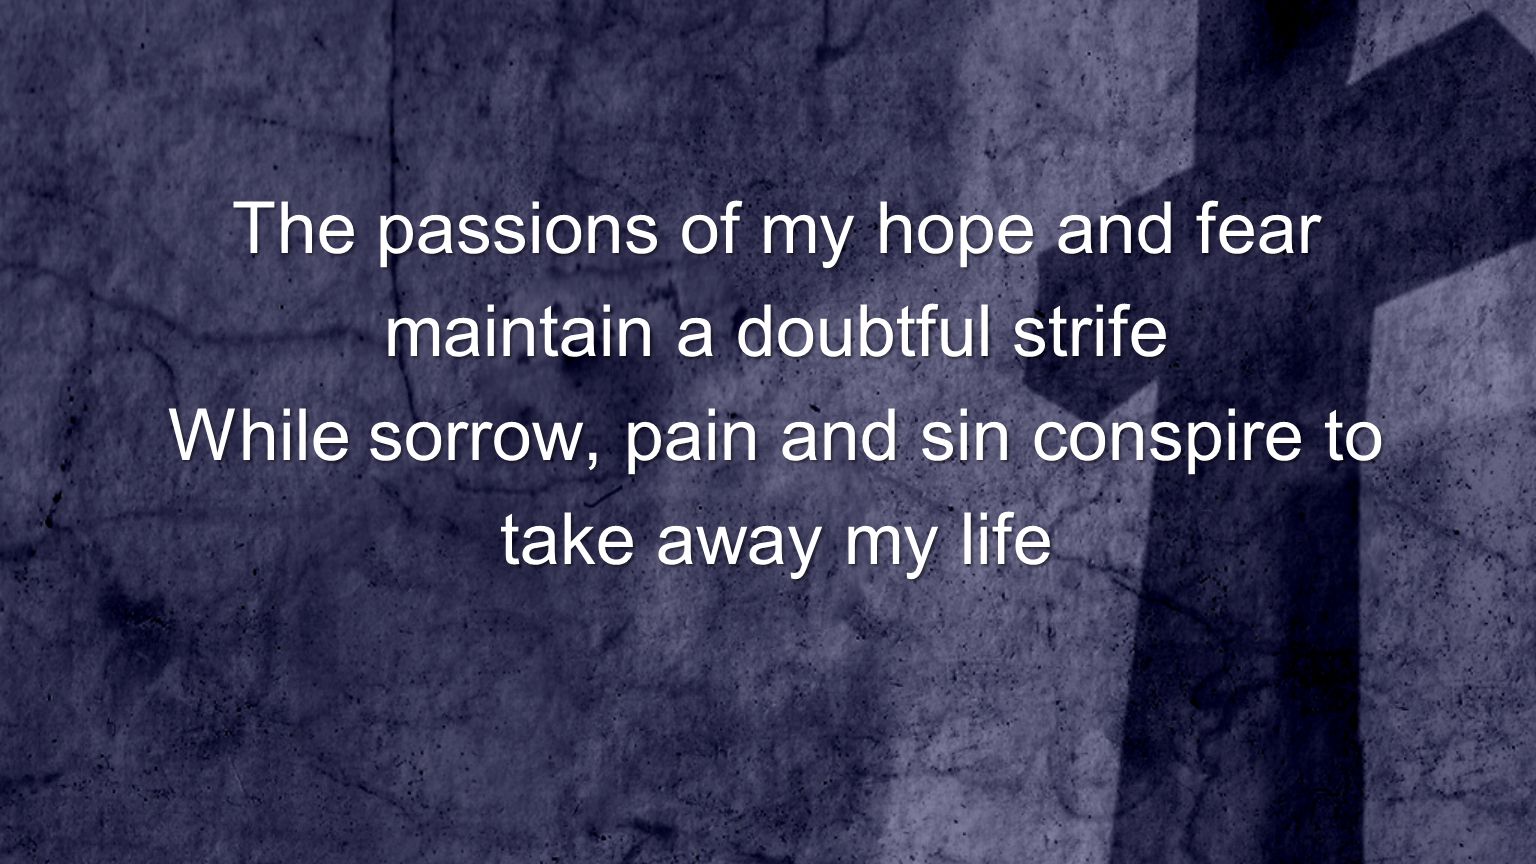 The passions of my hope and fear maintain a doubtful strife